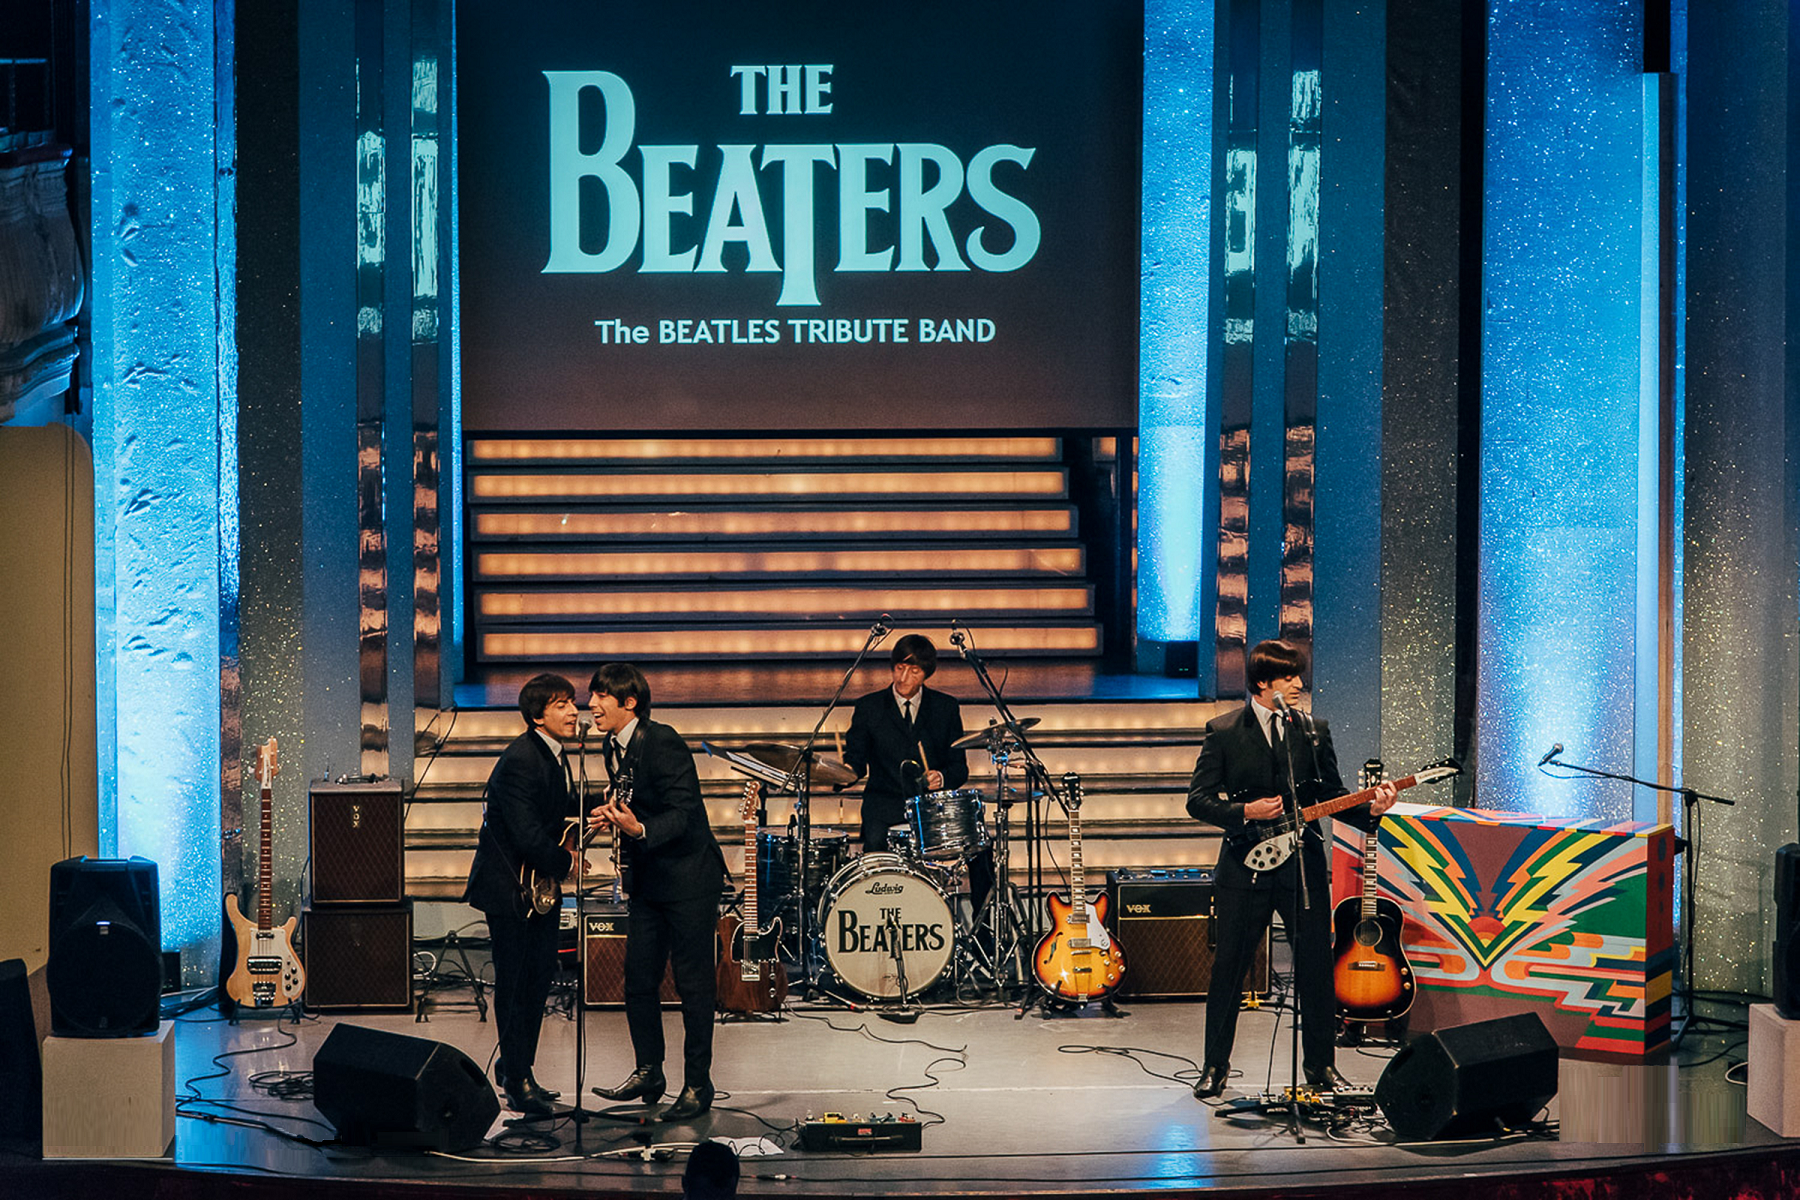 The BeaTers3